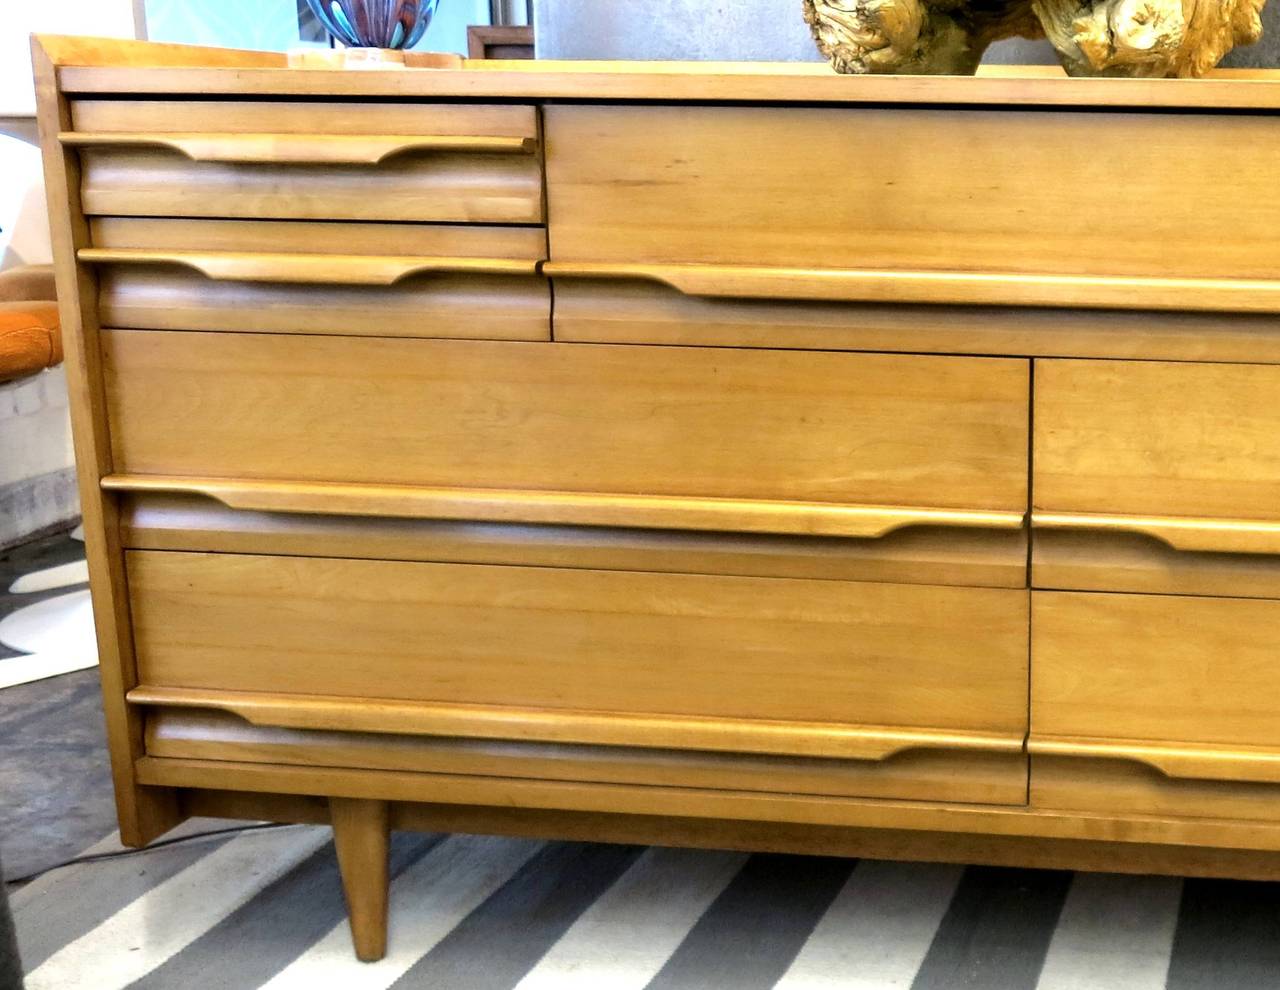 Unusual Crawford Furniture (Jamestown, NY) nine-drawer lowboy dresser from the 1950s made of honey and golden toned, finely aged solid maple. A bank of two large drawers on the bottom right and two on the bottom left are topped with a large center